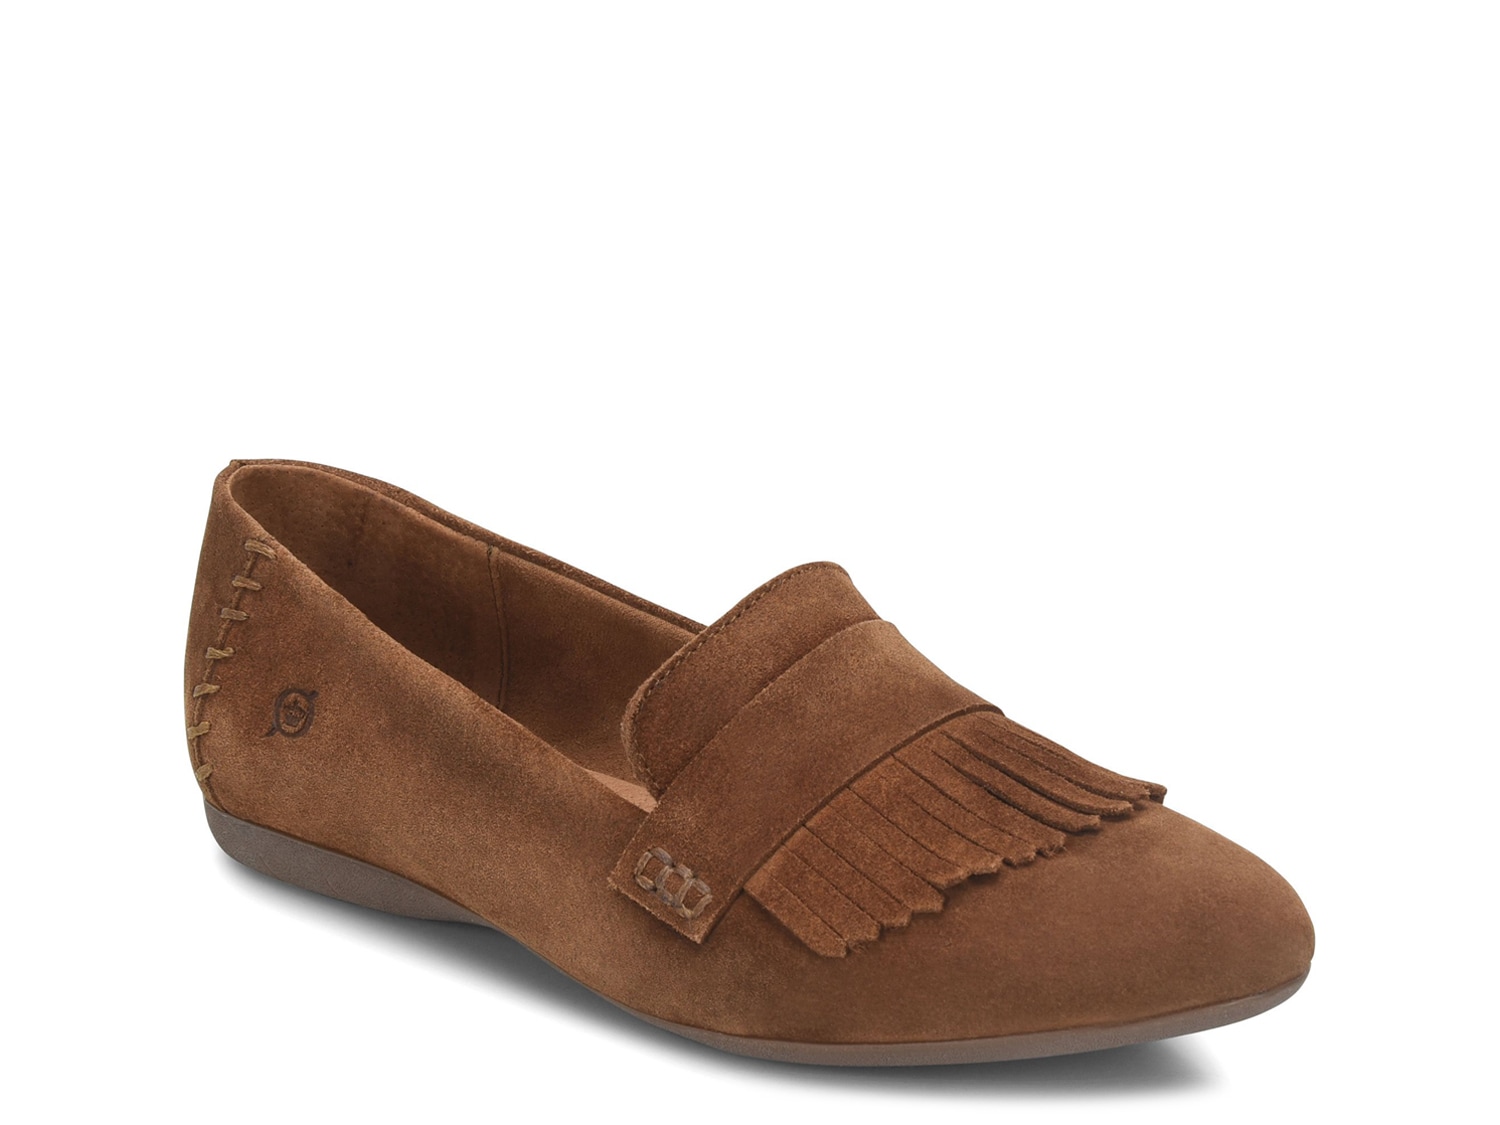 Born McGee Loafer Women's Shoes | DSW